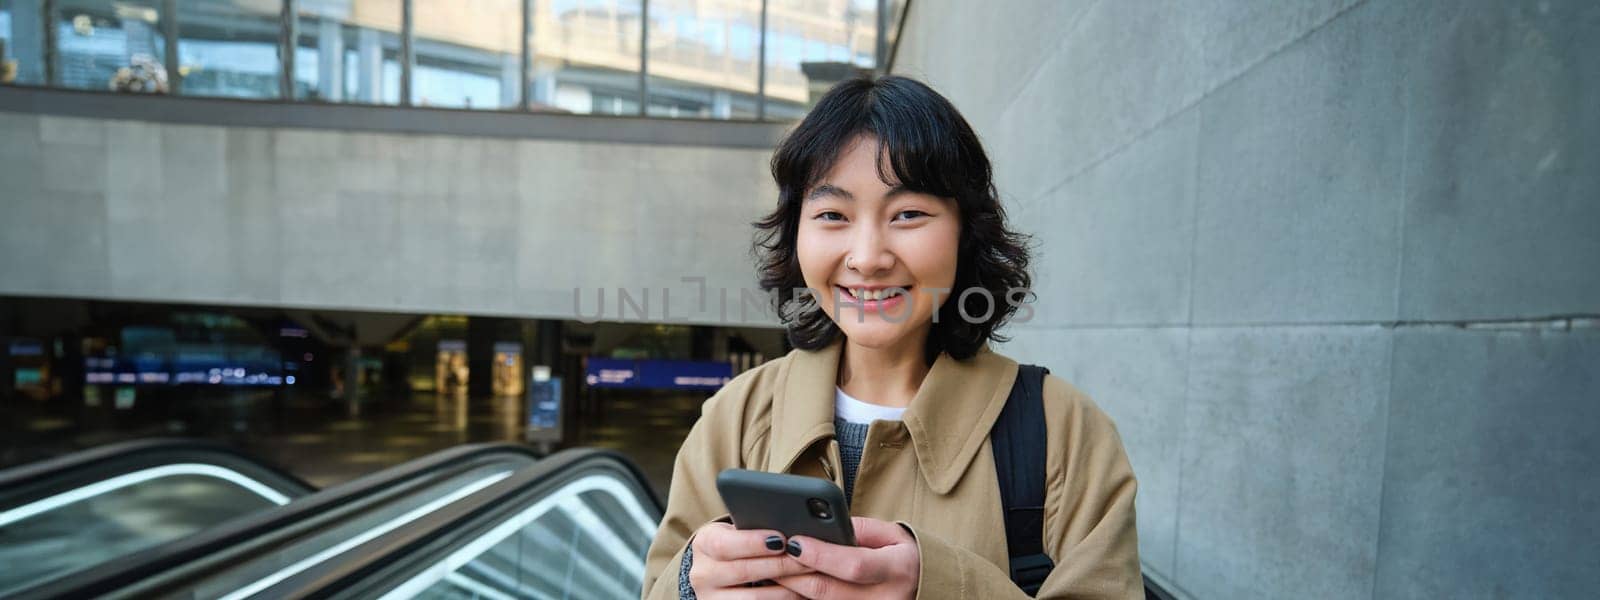 Young brunette woman commutes, goes somewhere in city, stands on escalator and uses mobile phone, holds smartphone and smiles.